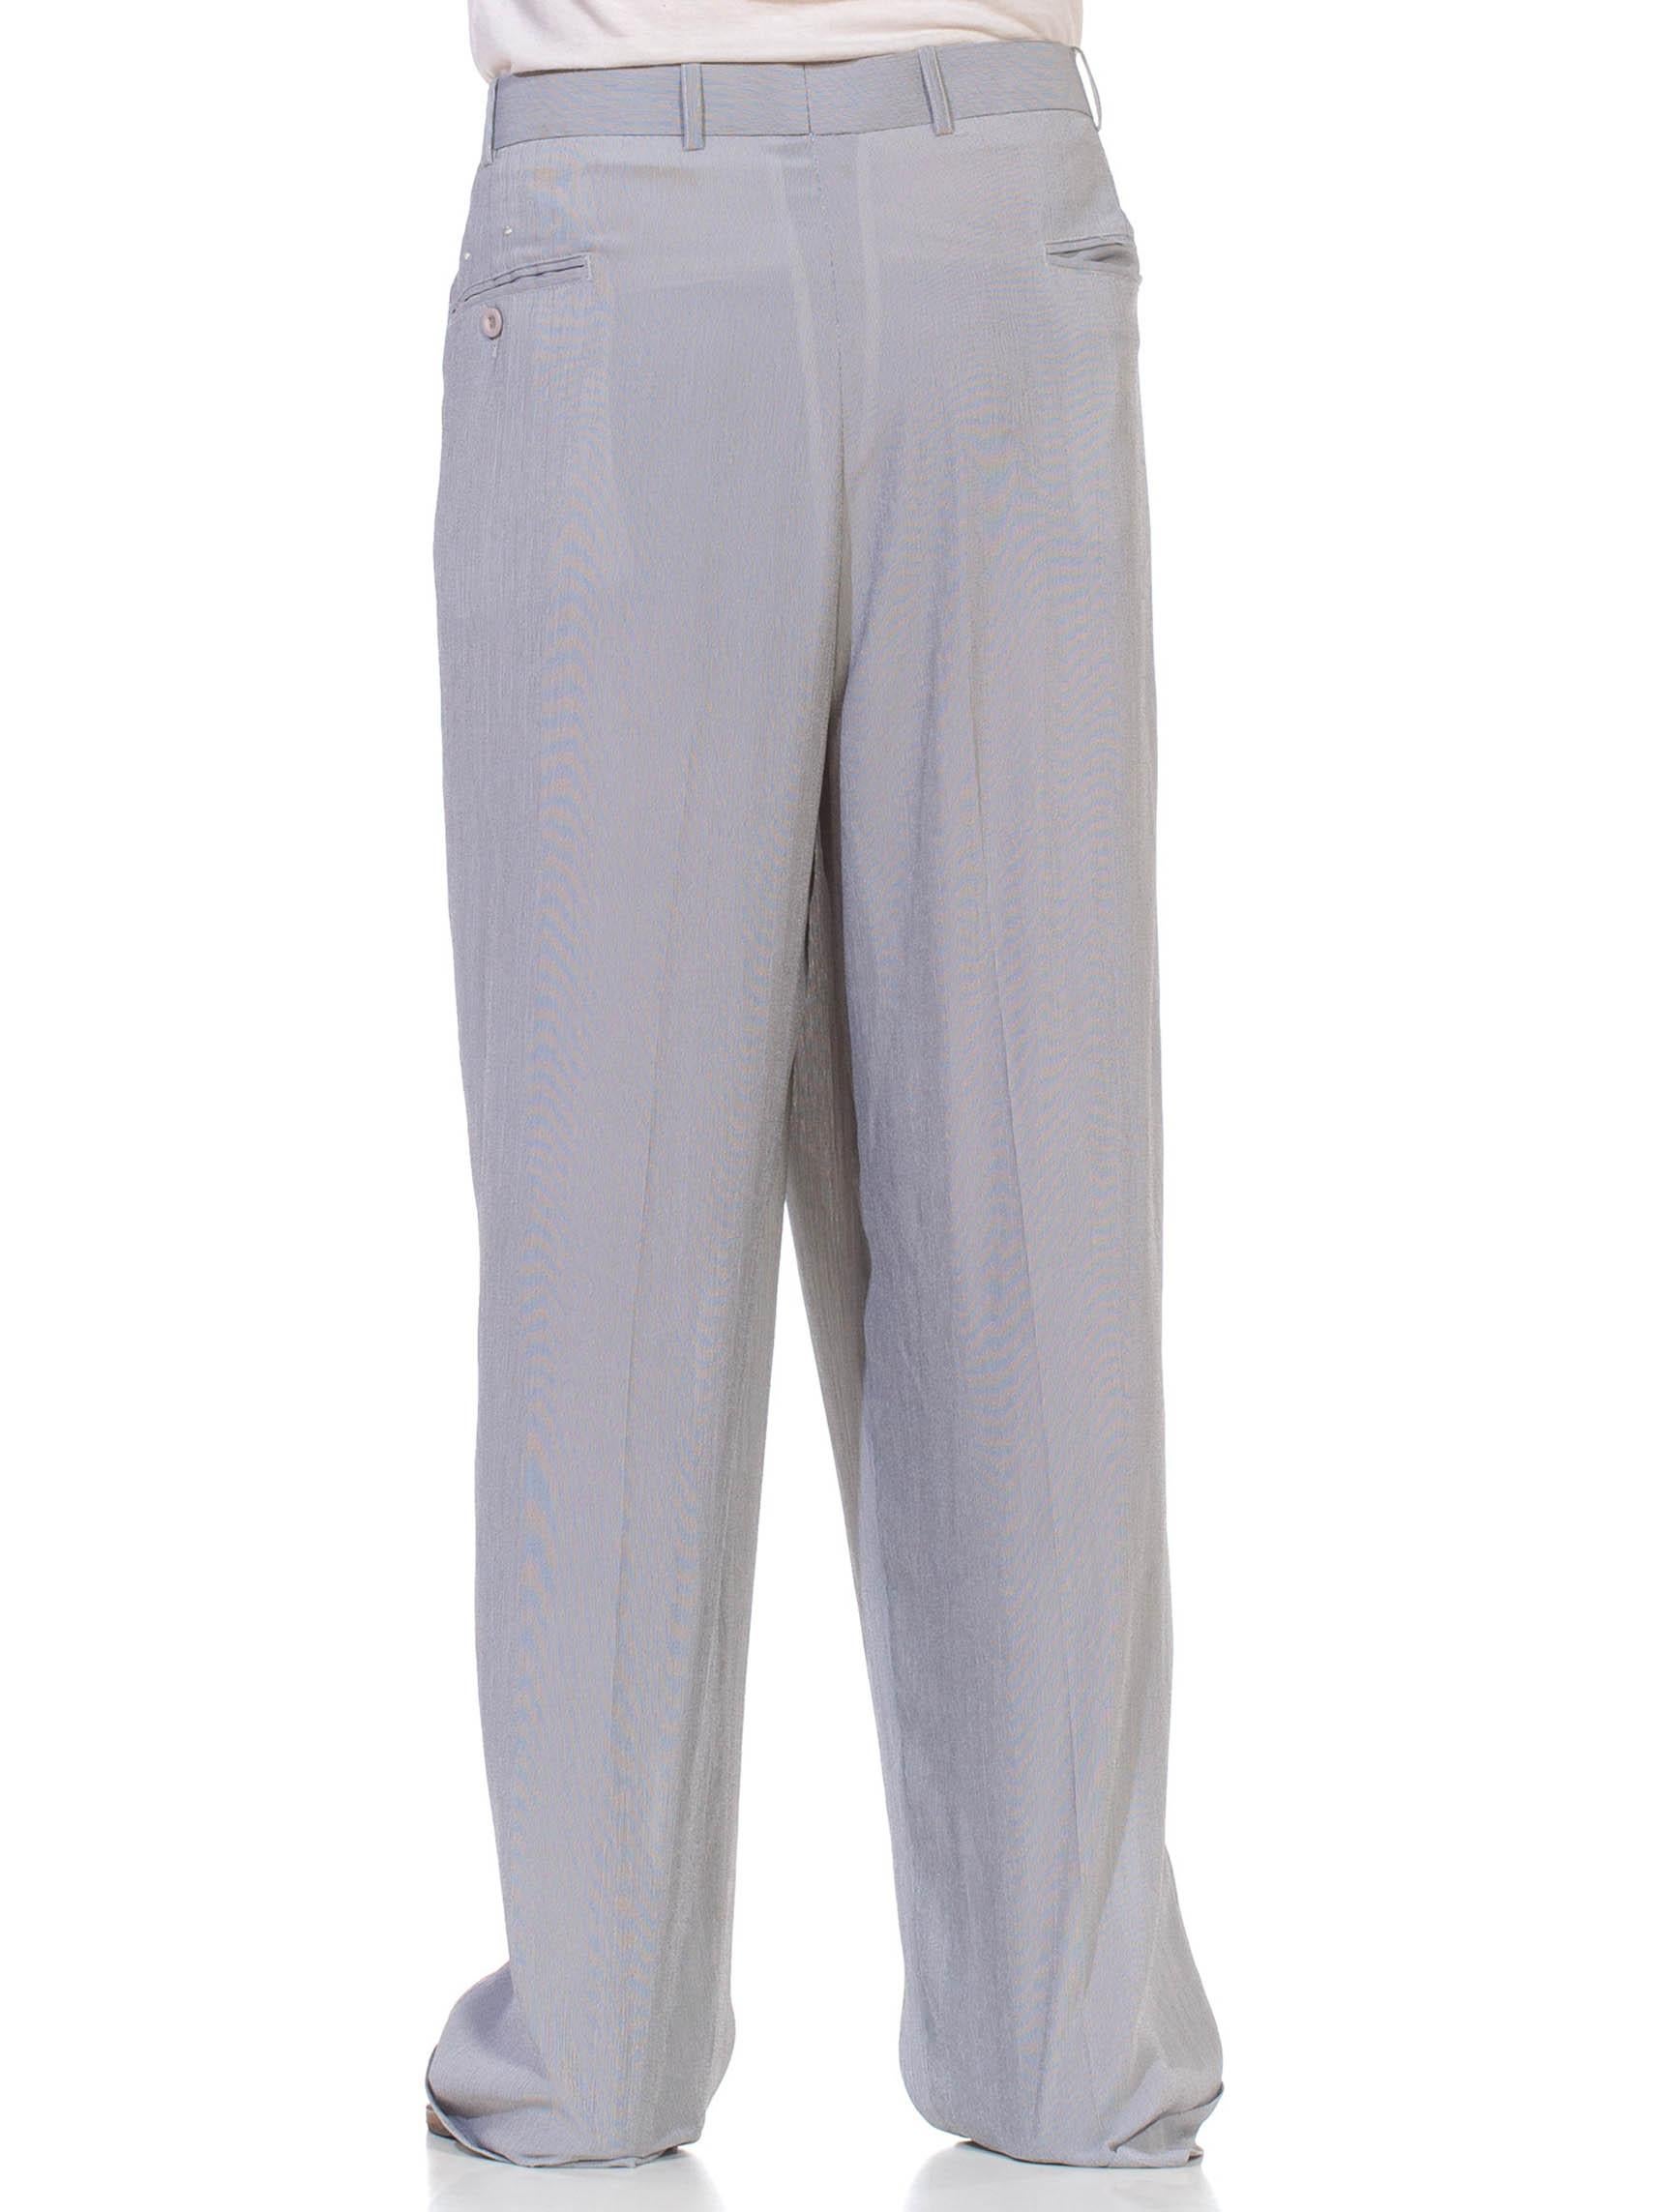 1990S Grey Polyester Rat Pack Style Men's Very Lightweight Crepe Pants For Sale 1